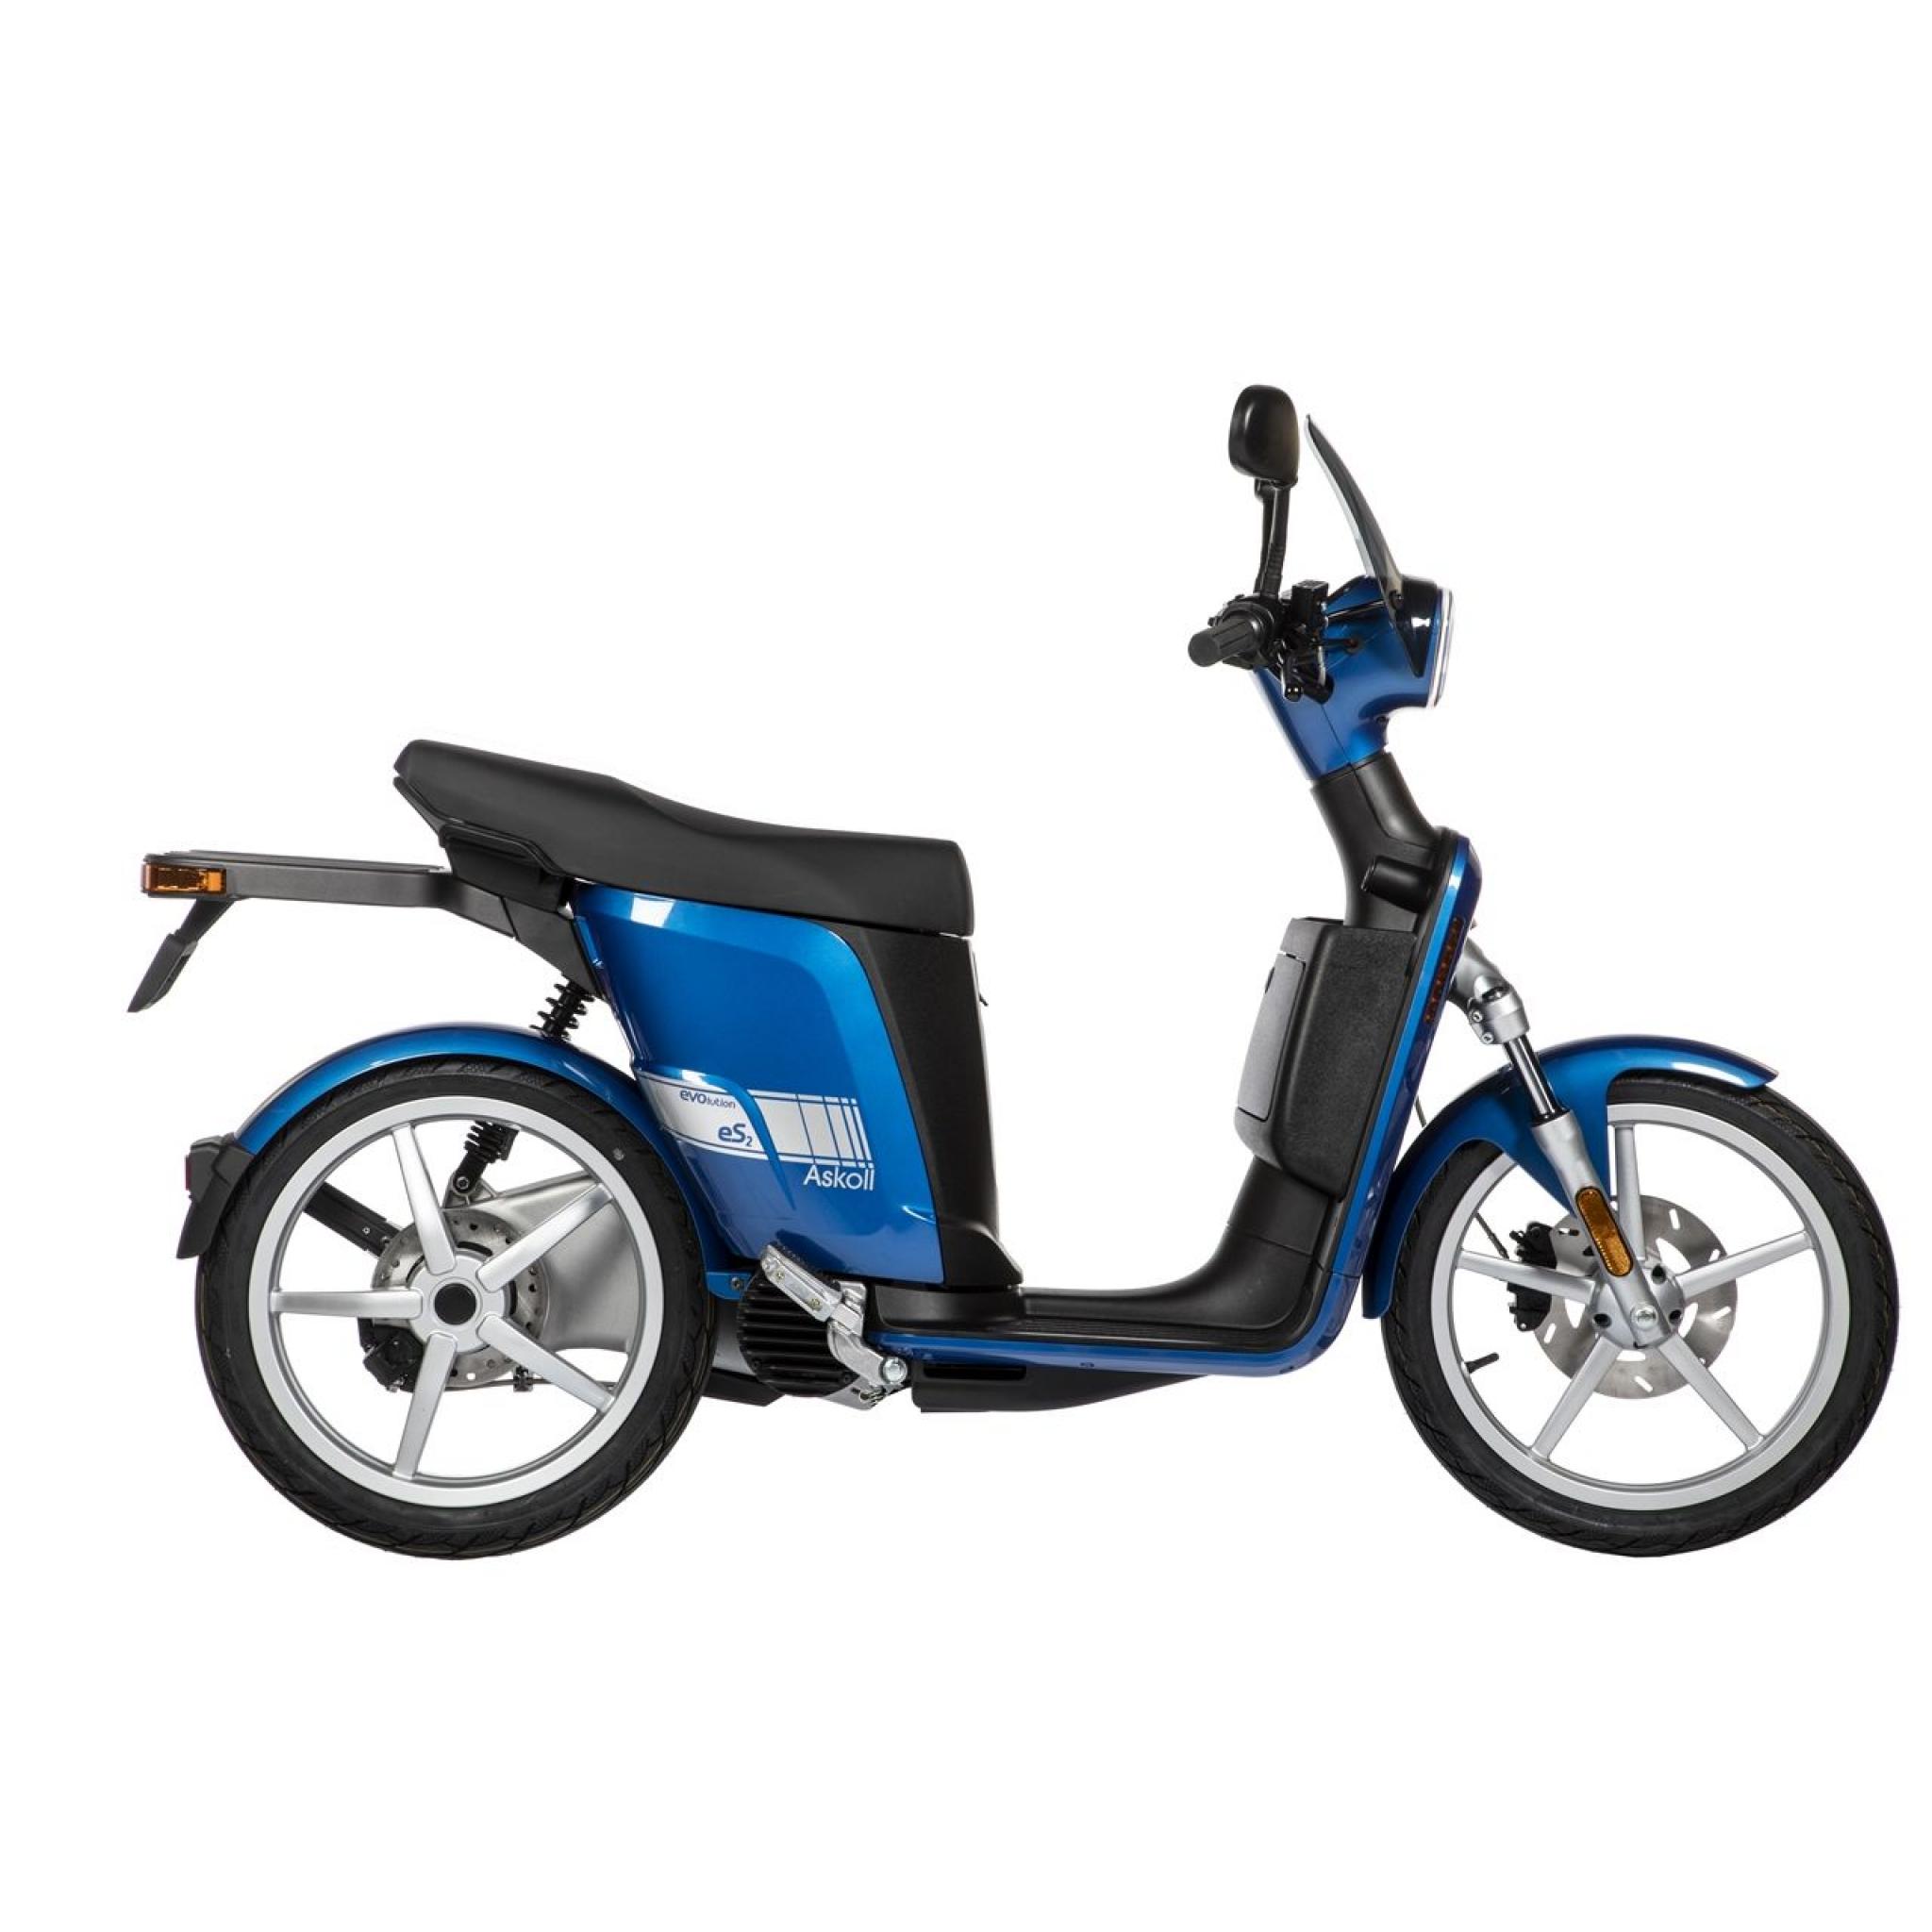 Askoll Es2 (2700w) Evolution Electric Moped Scooter